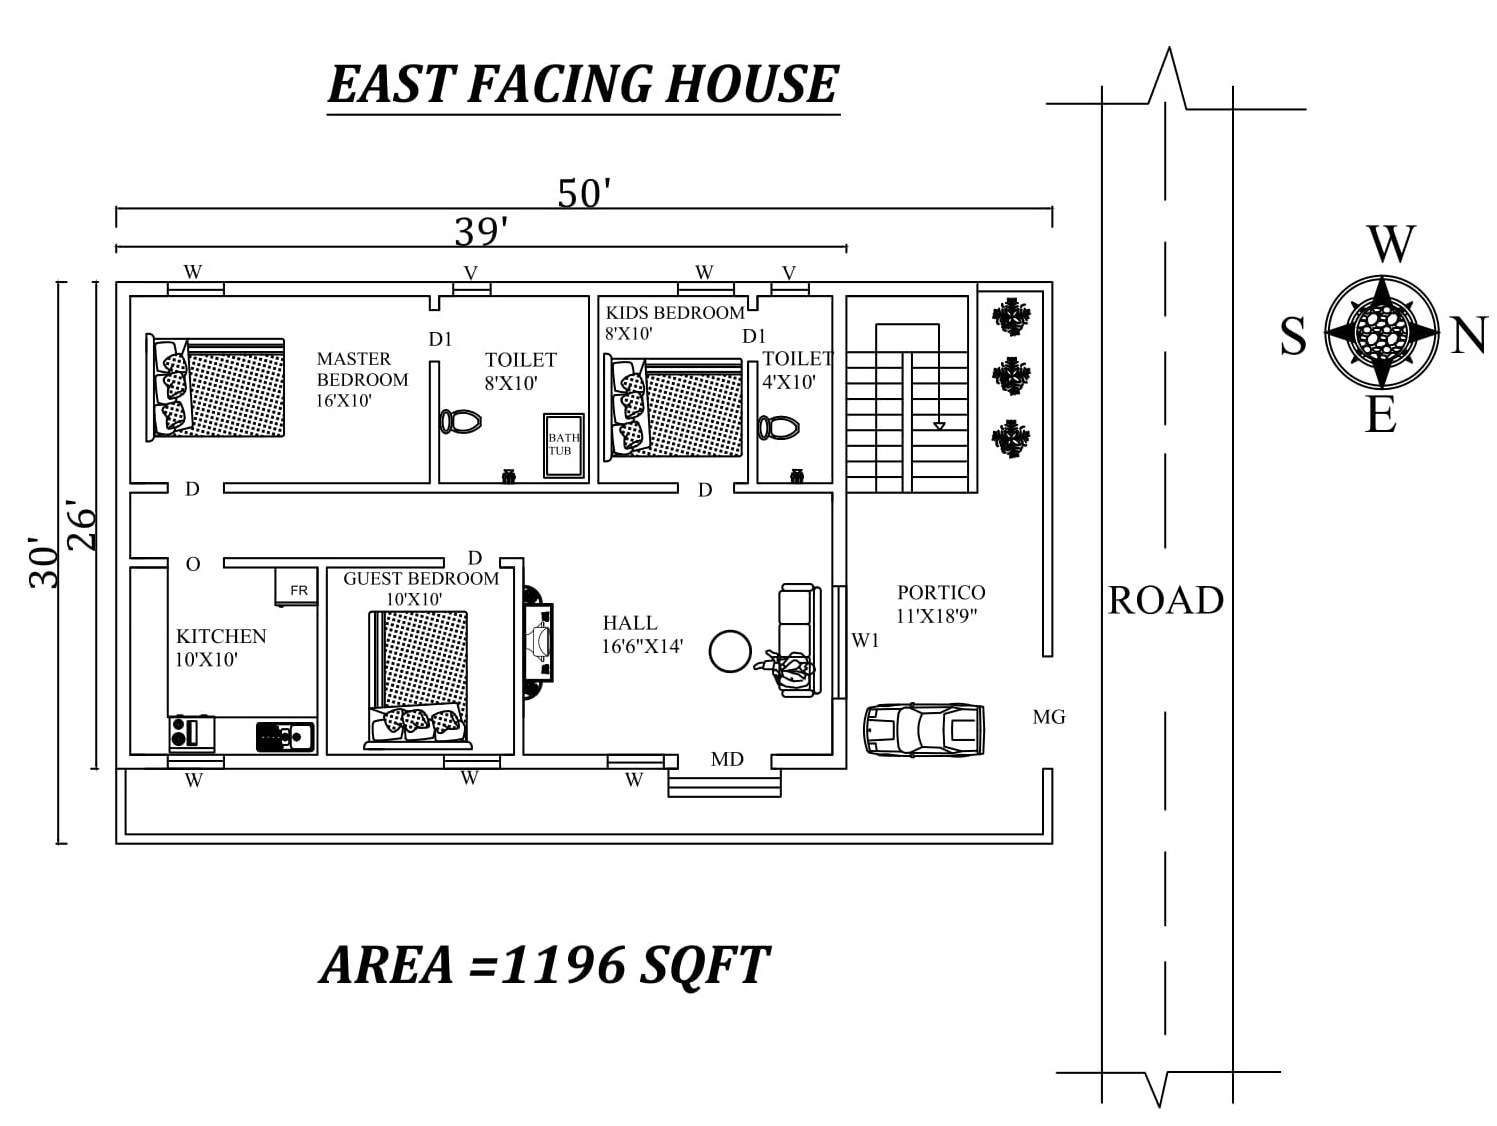 50 X30 Furnished 3bhk East Facing House Plan As Per Vastu Shastra Cad Drawing File Details Cadbull